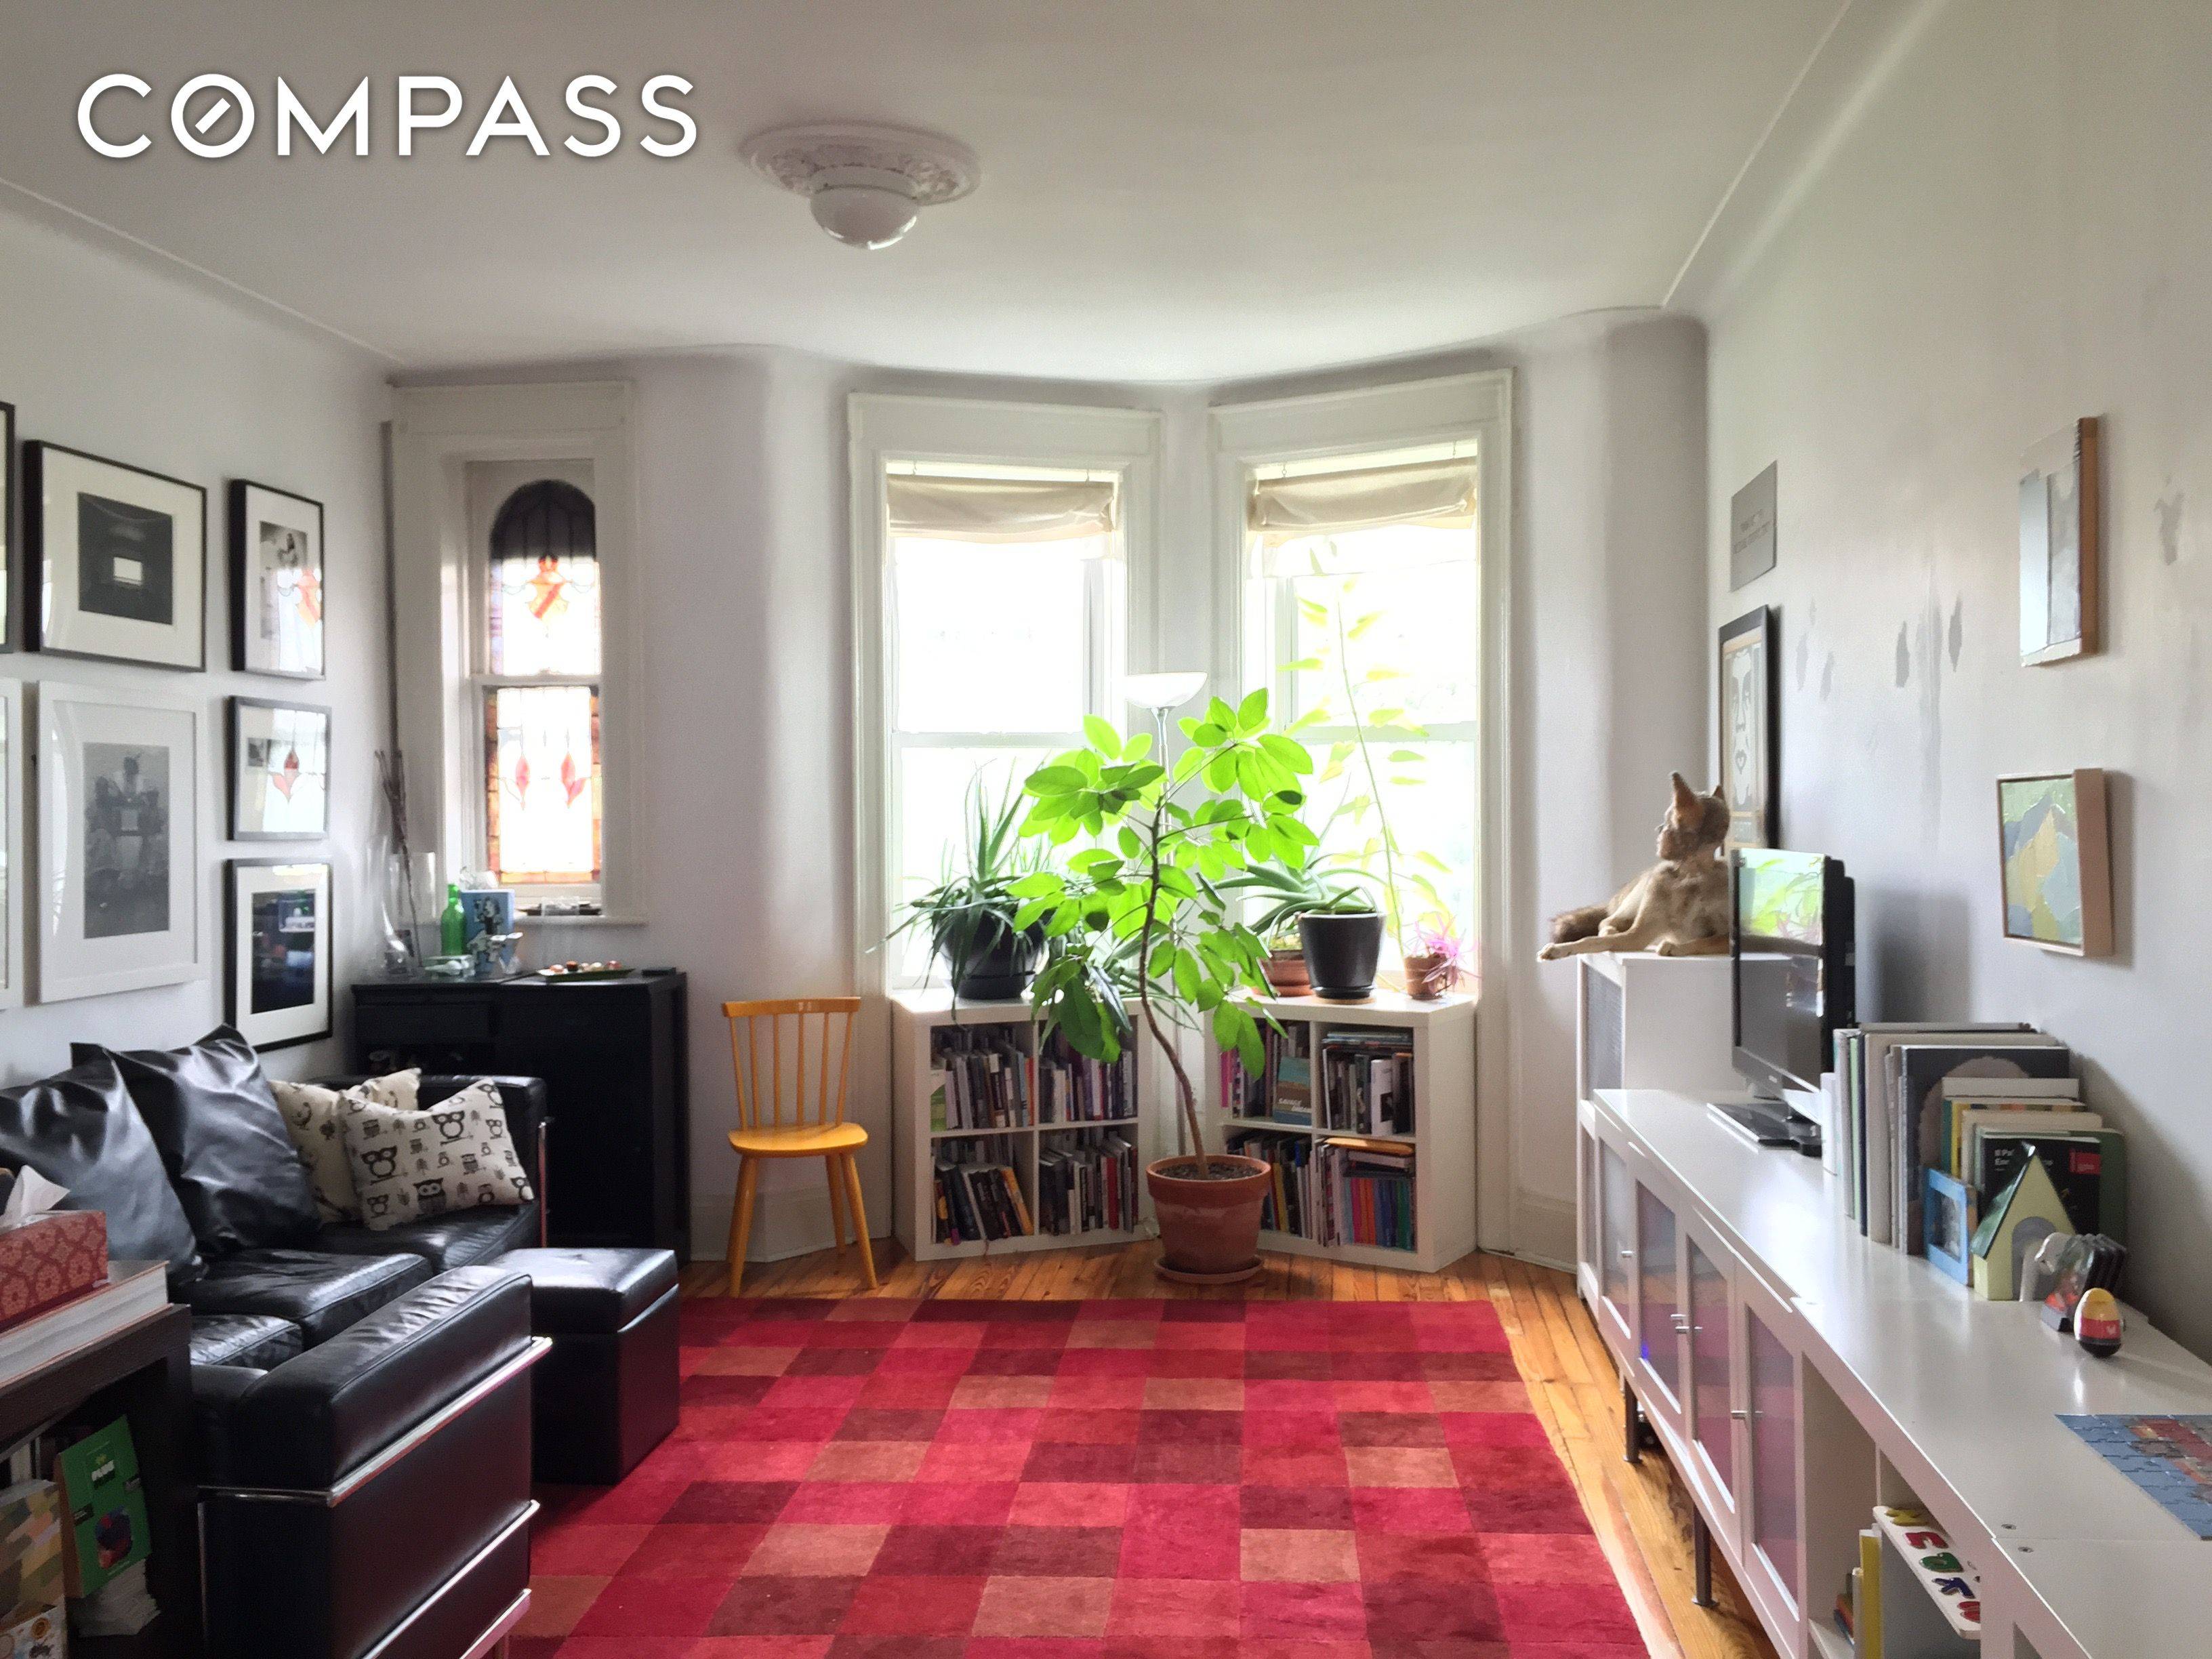 This extremely spacious top floor 2 bedroom apartment, only 1 2 block from Prospect Park, is available for November 18.